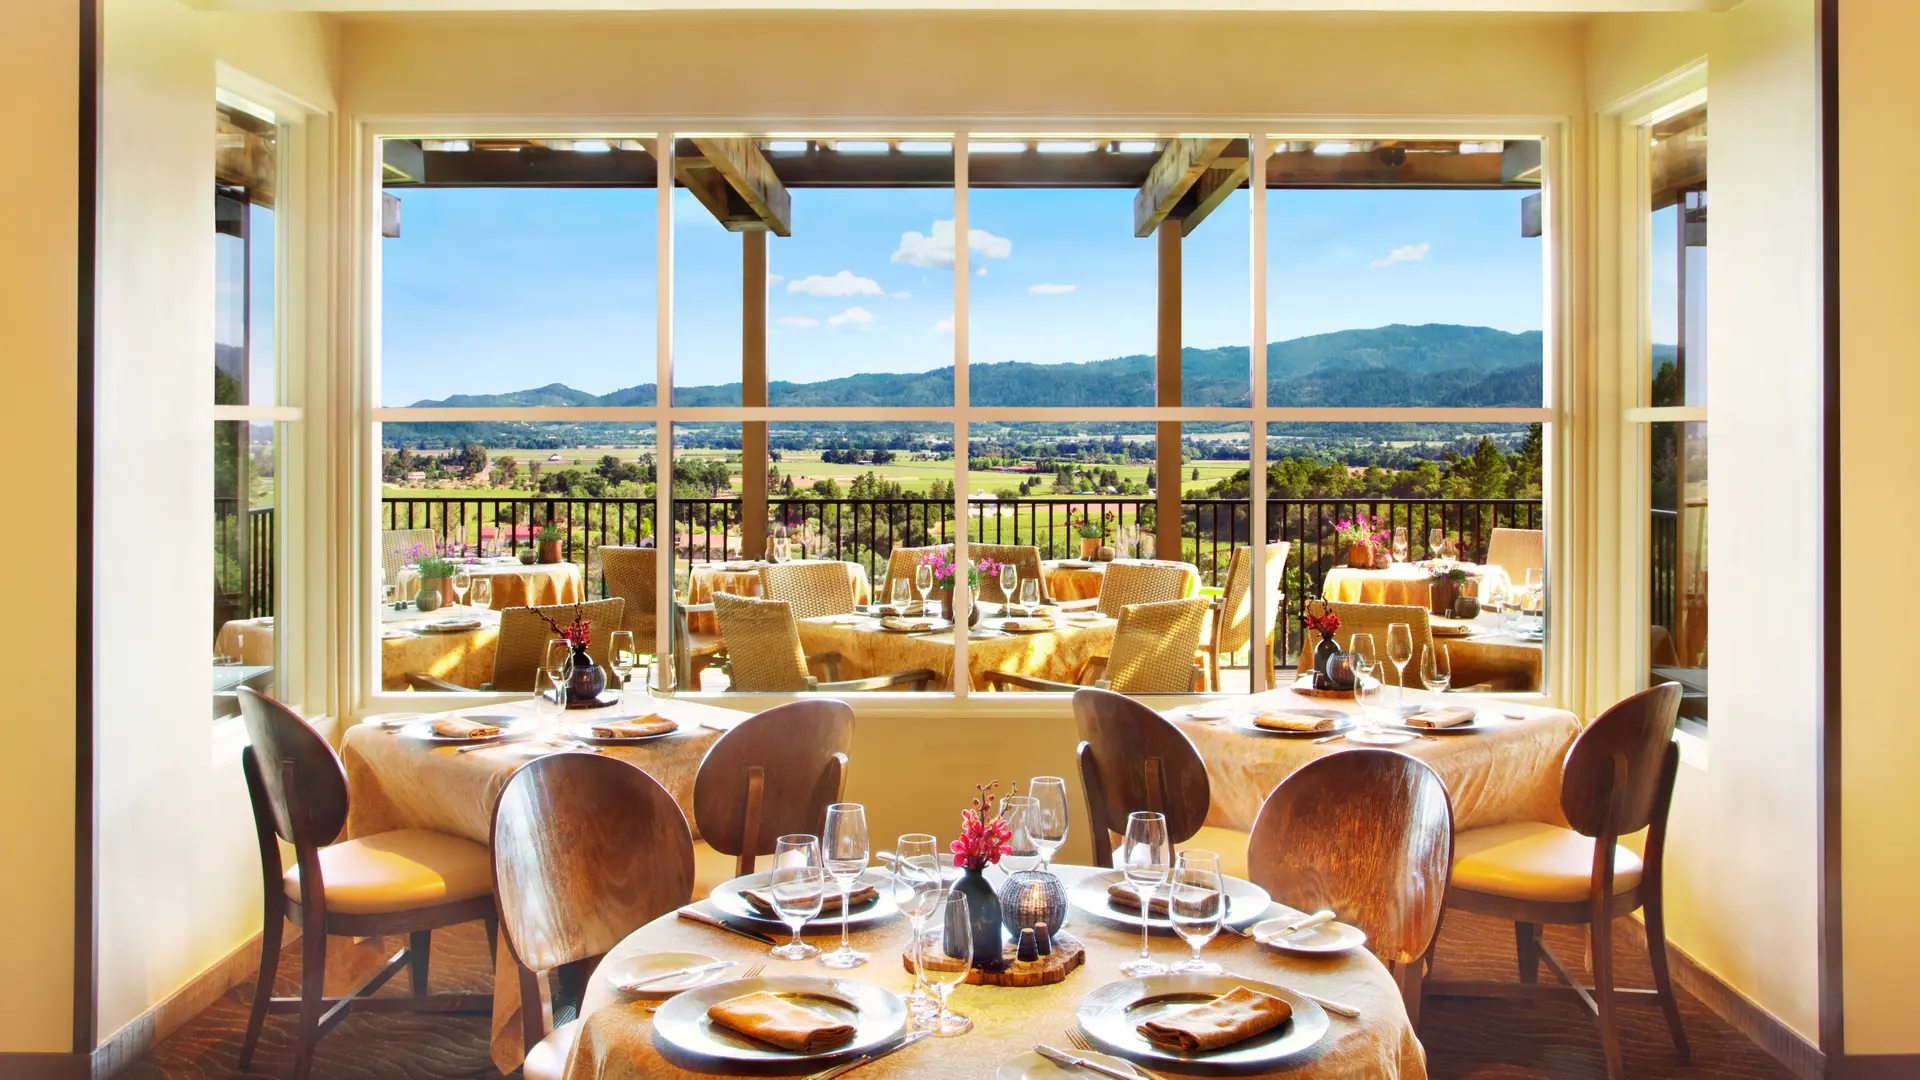 Hotels Articles - The Best Luxury Hotels in California